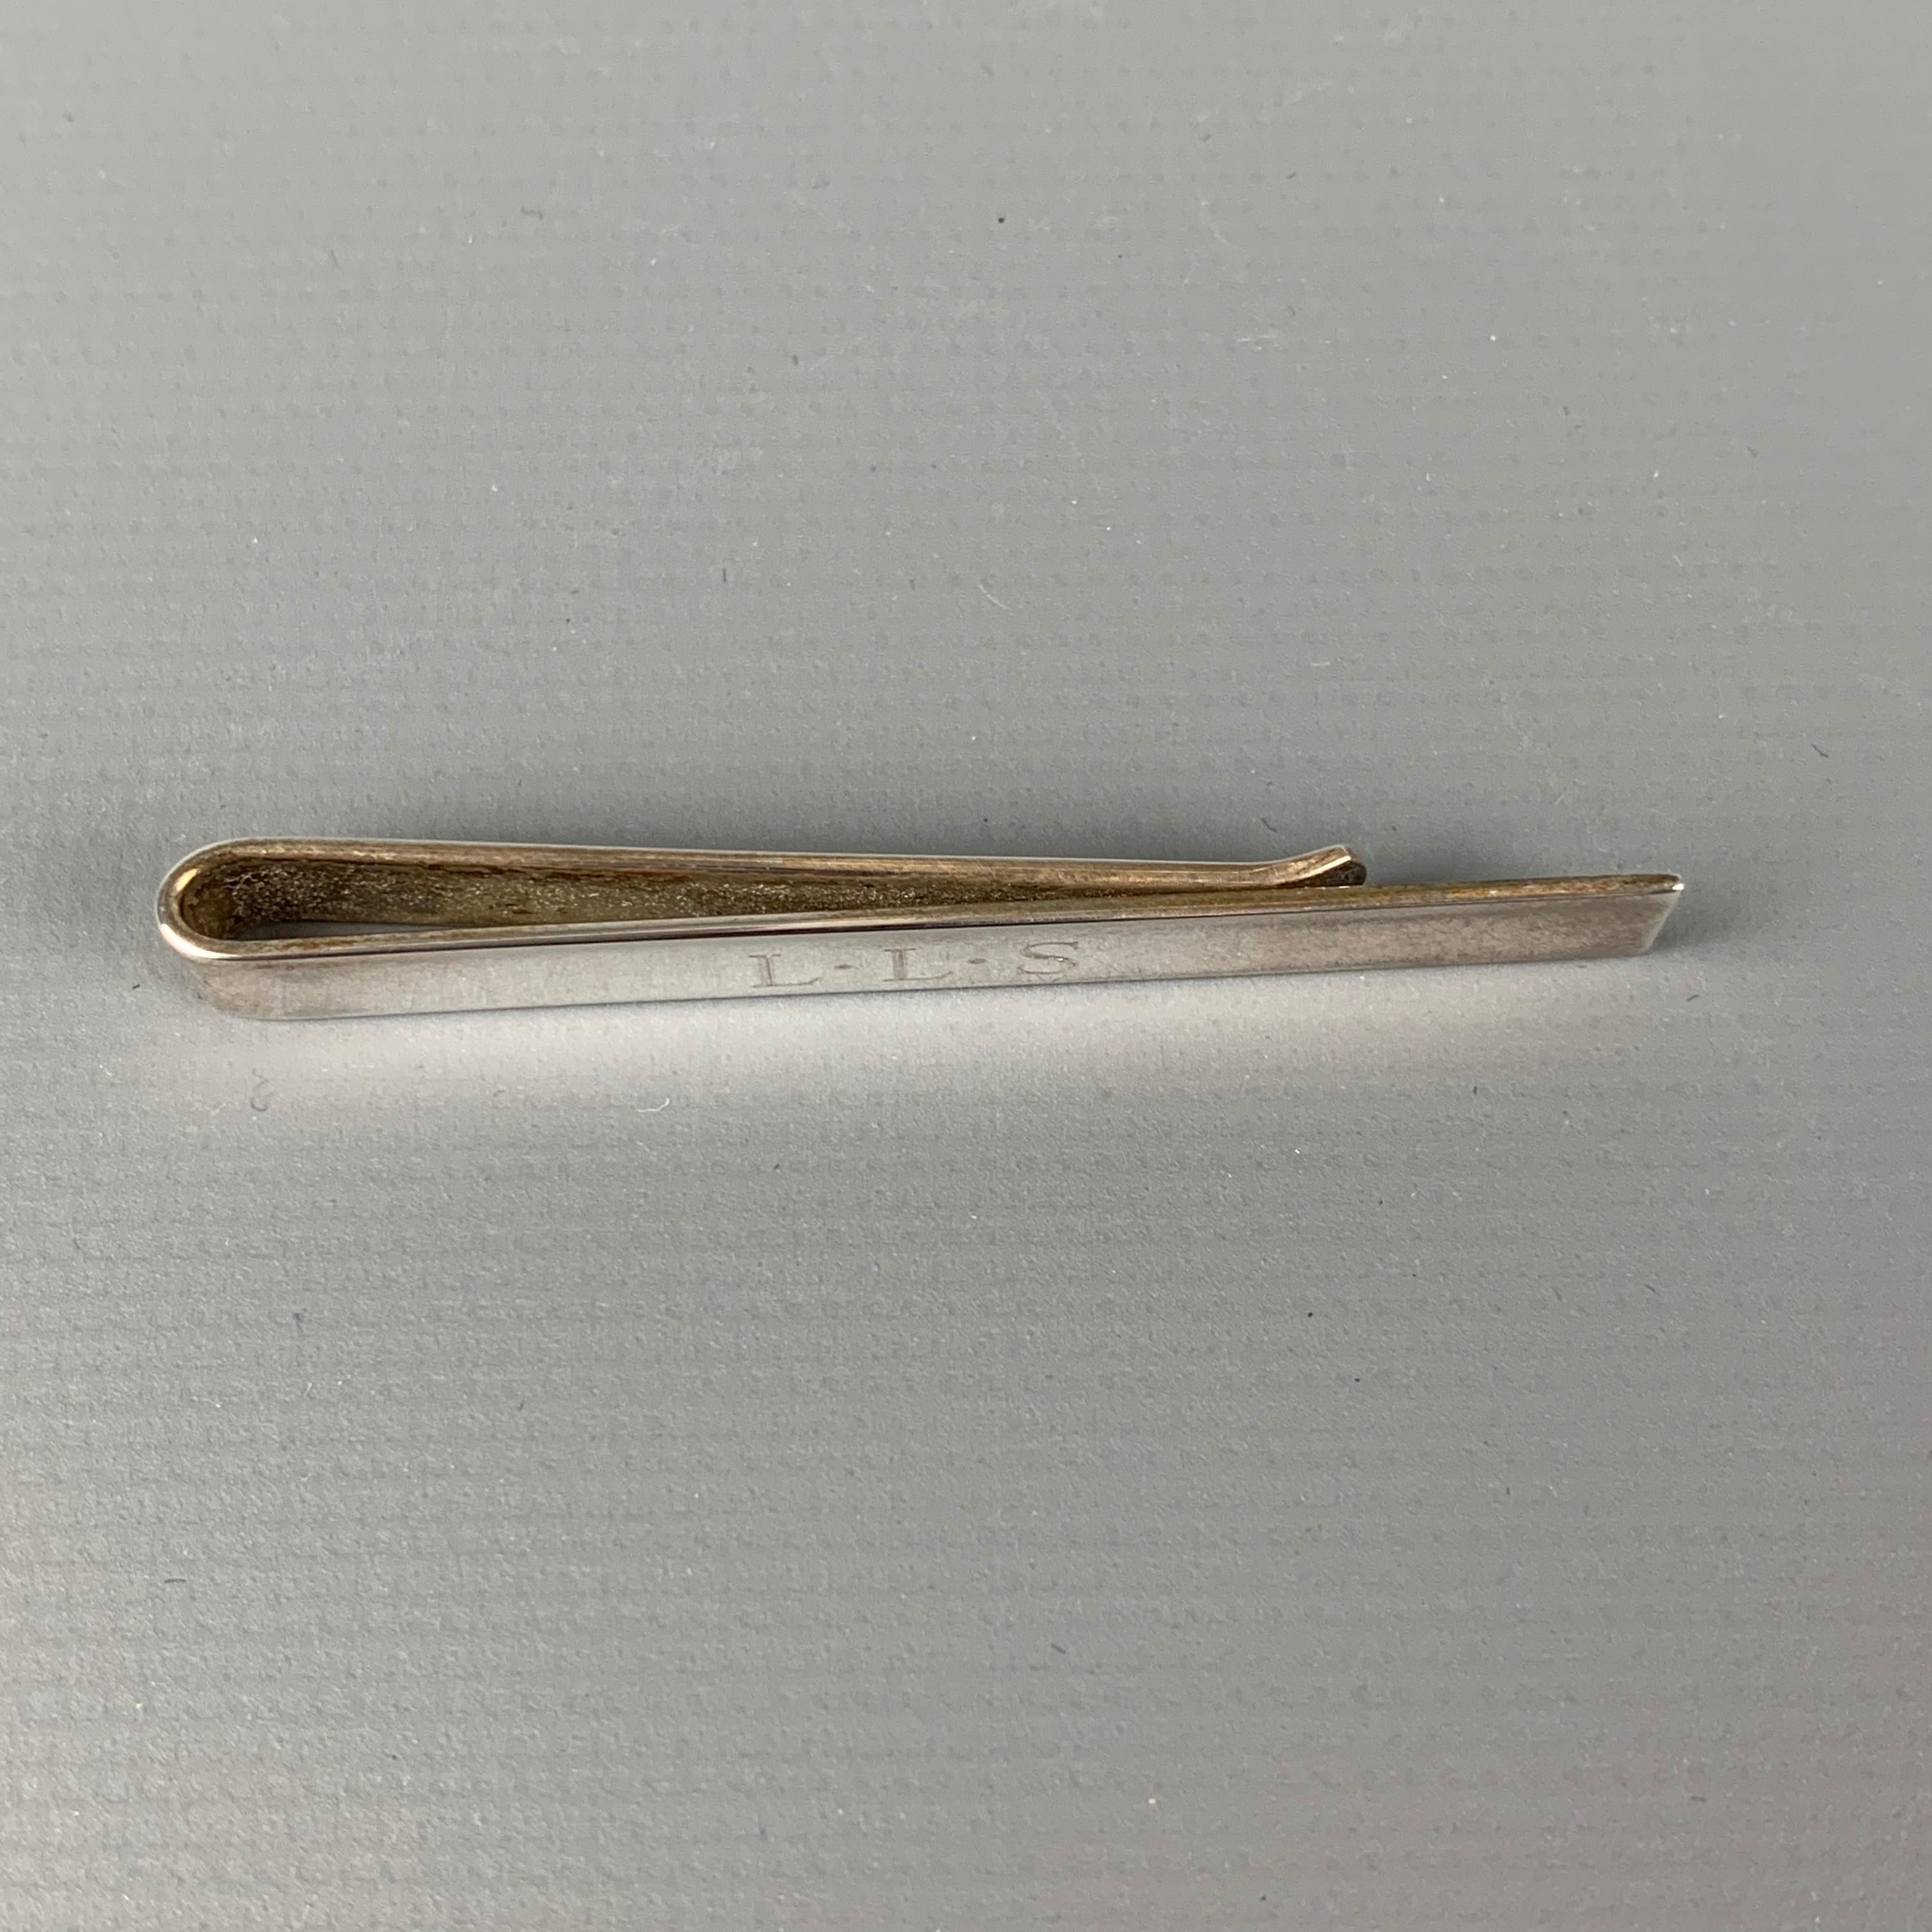 Vintage TIFFANY & CO. tie bar comes in a sterling silver with a engraved 'LLS' design. Includes pouch. 

Very Good Pre-Owned Condition.
Original Retail Price: $250.00

Measurements:

Length: 2 in. 